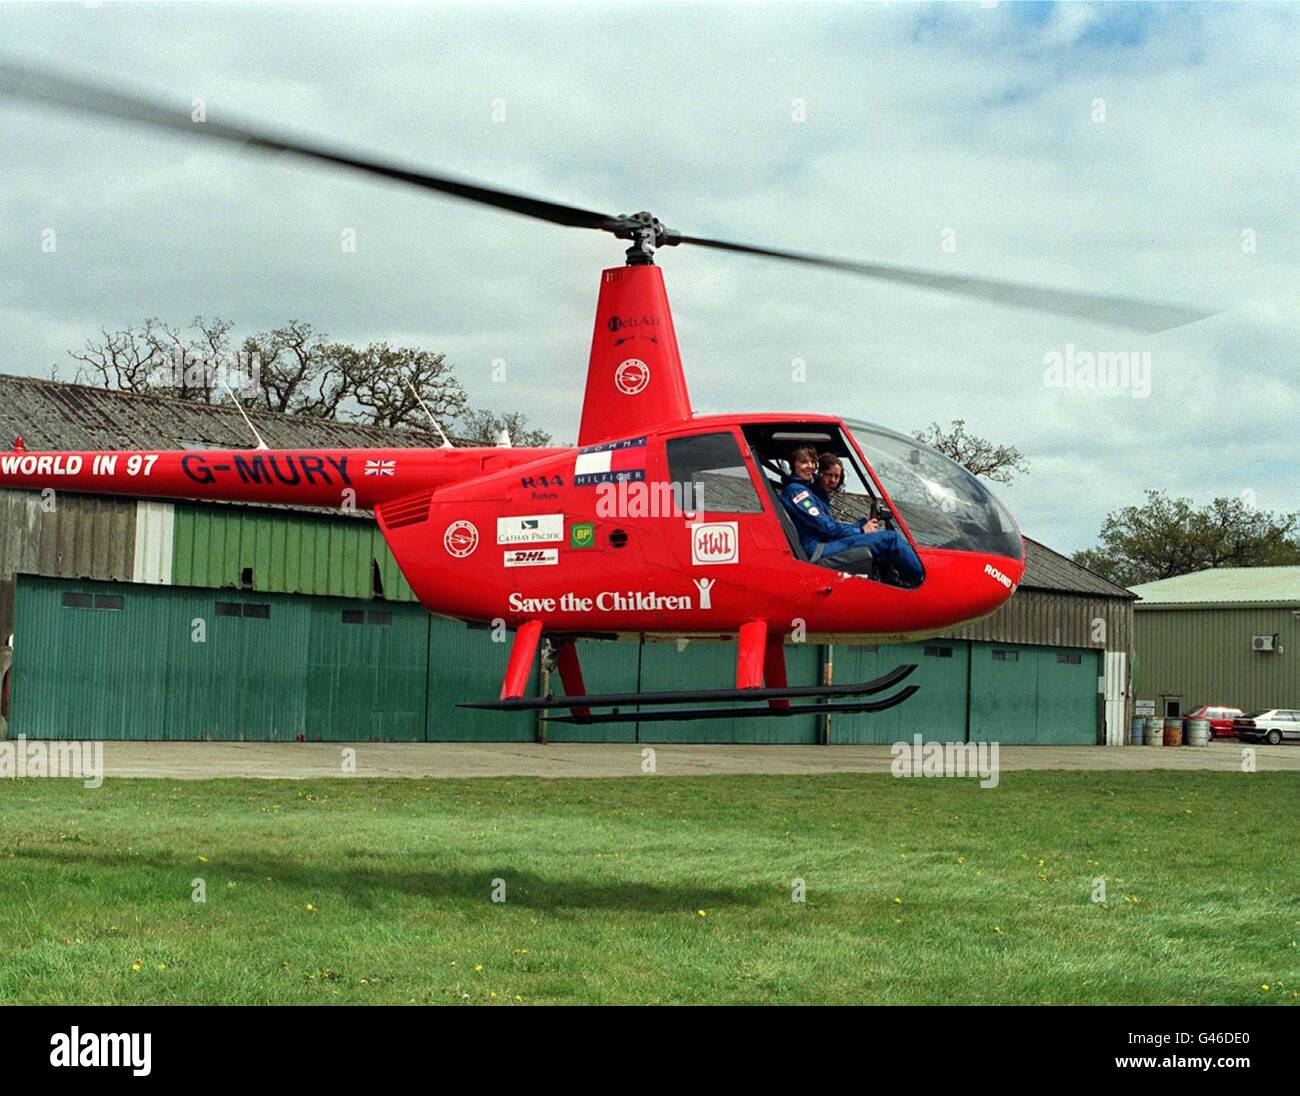 Jennifer Murray, a 56-year-old grandmother, is poised to fly into the record books as the first woman to pilot a helicopter around the world. This pioneering trip, which aims to raise 500,000 for Save The Children, takes off on May 10, 1997, from Denham, Middlesex, where Jennifer is pictured today with co-pilot Quentin Smith, 32. Photo by Sam Pearce. Stock Photo